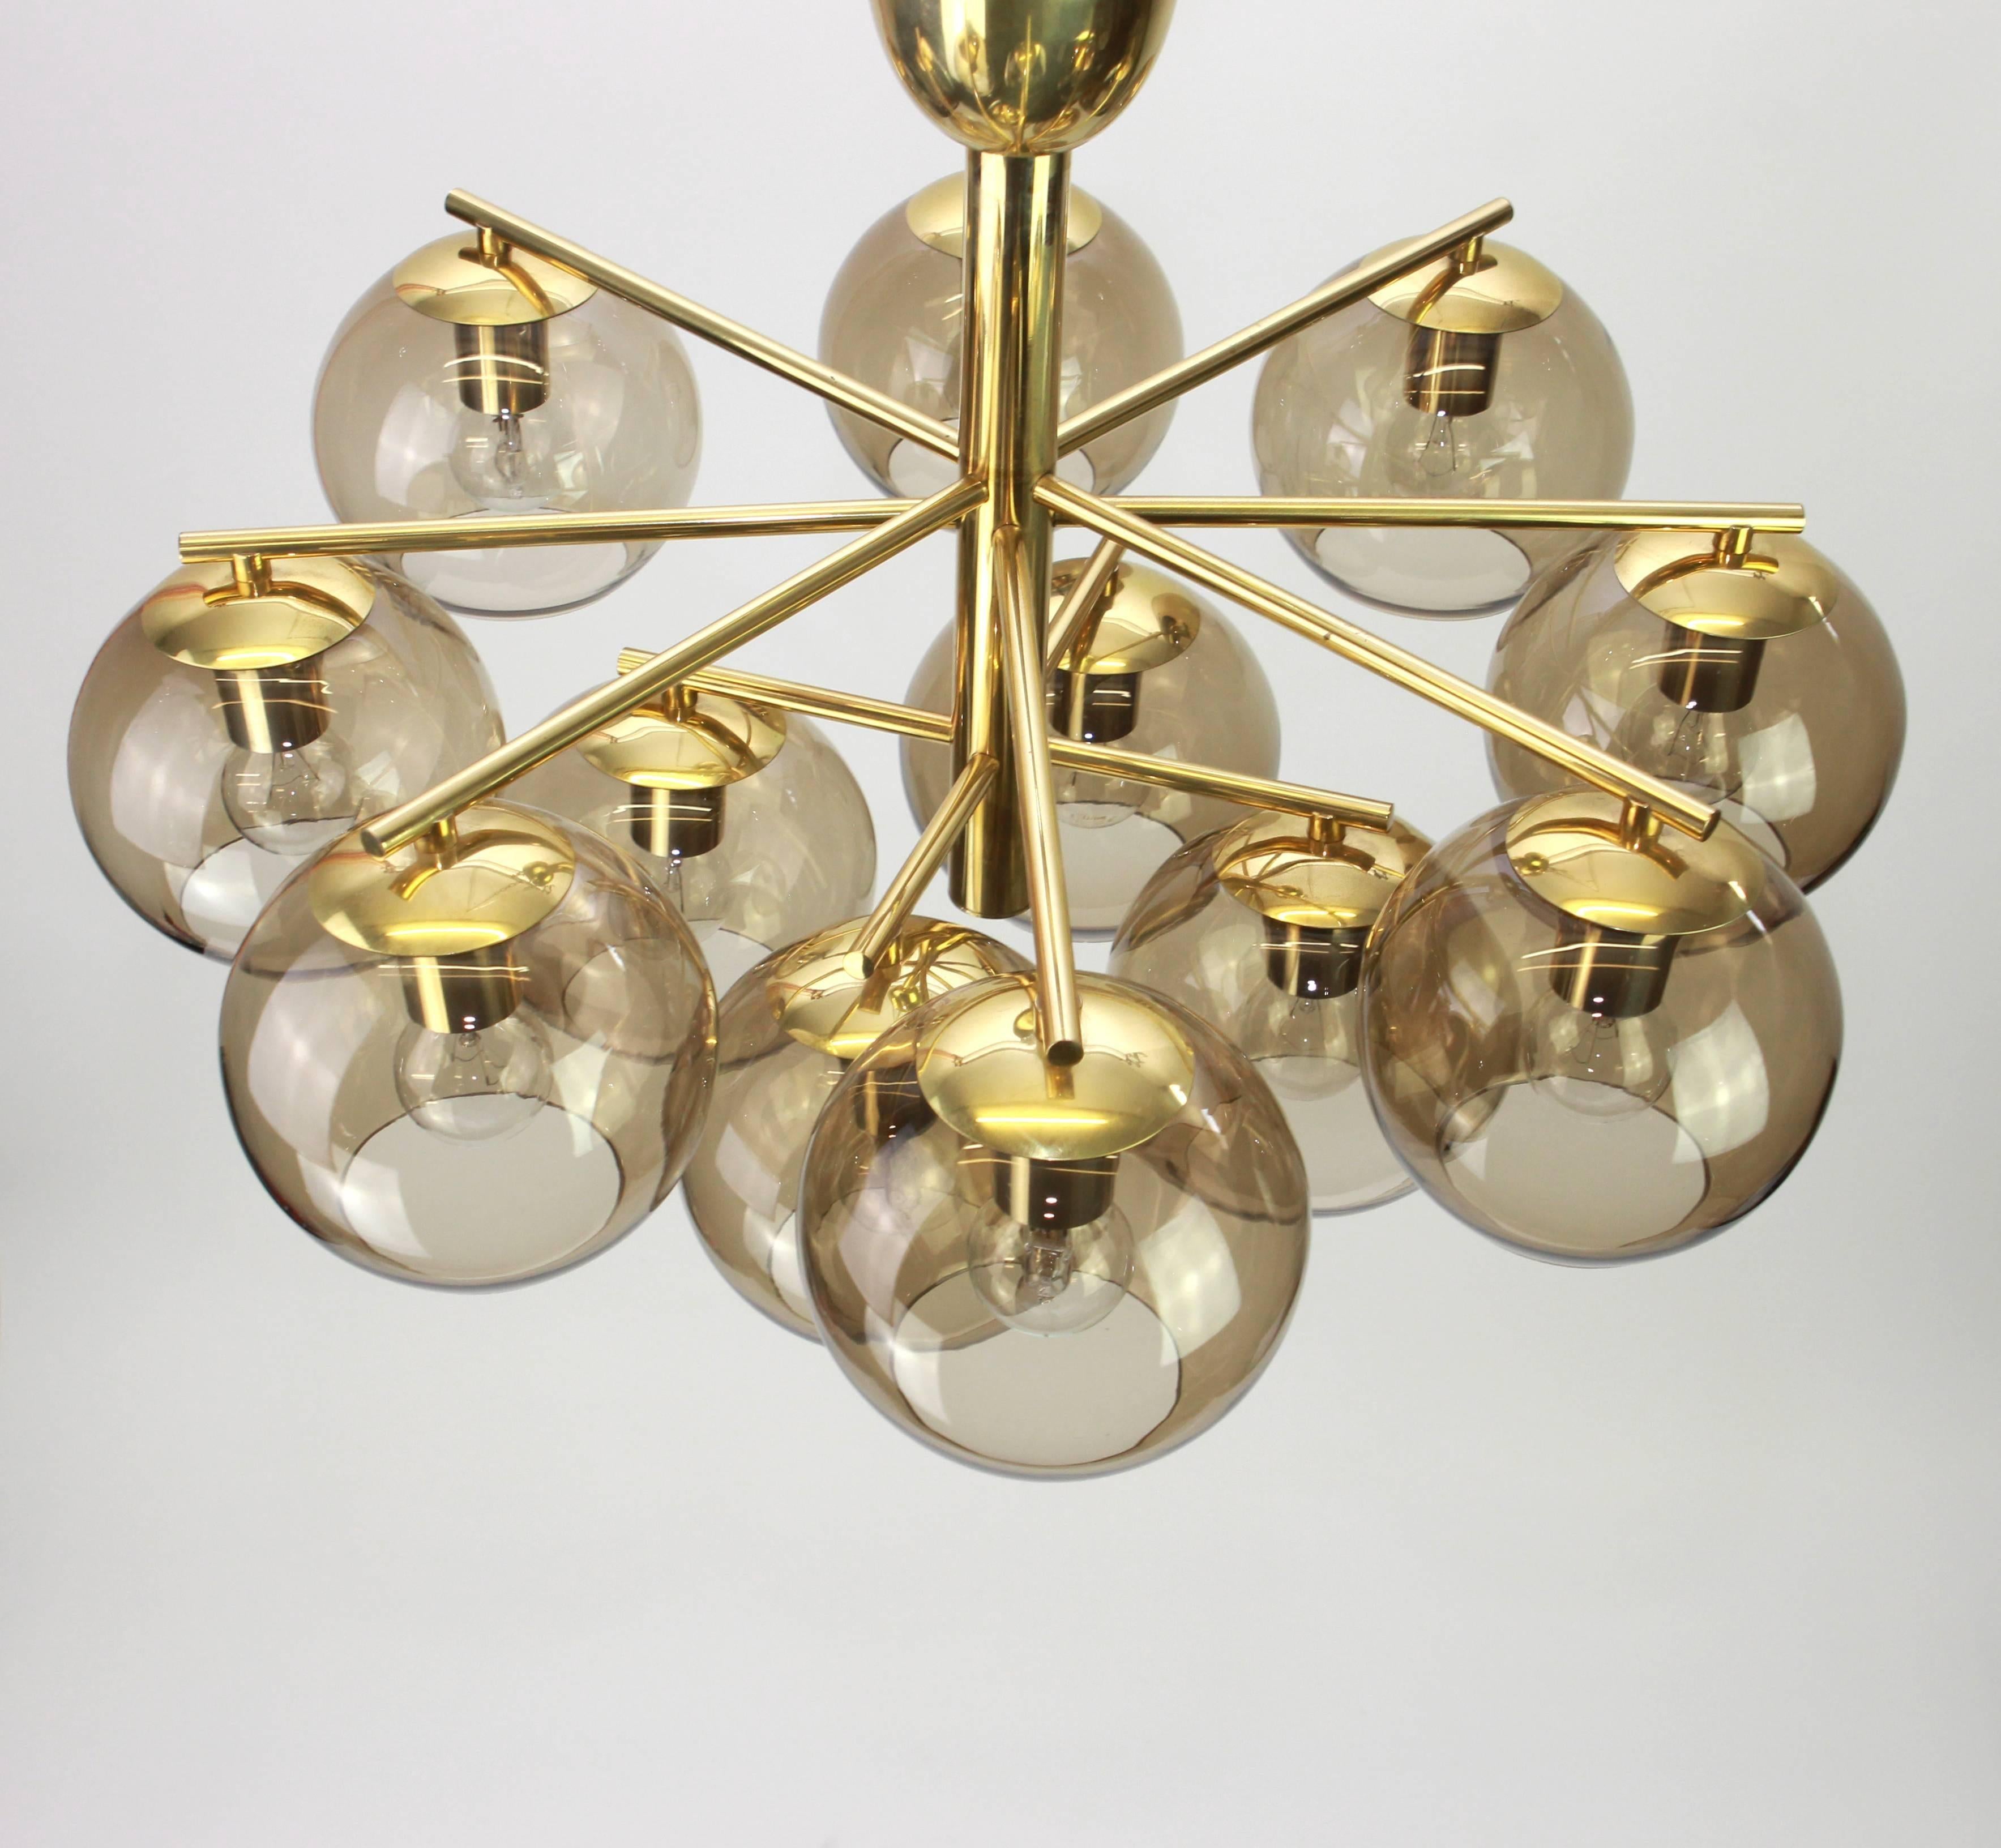 Twelve-light brass chandelier in the style of Sciolari
Smoked glass in a very beautiful smokey brown color on a brass frame, best of the 1960s.

High quality and in very good condition. Cleaned, well-wired and ready to use. 
The fixture requires 12